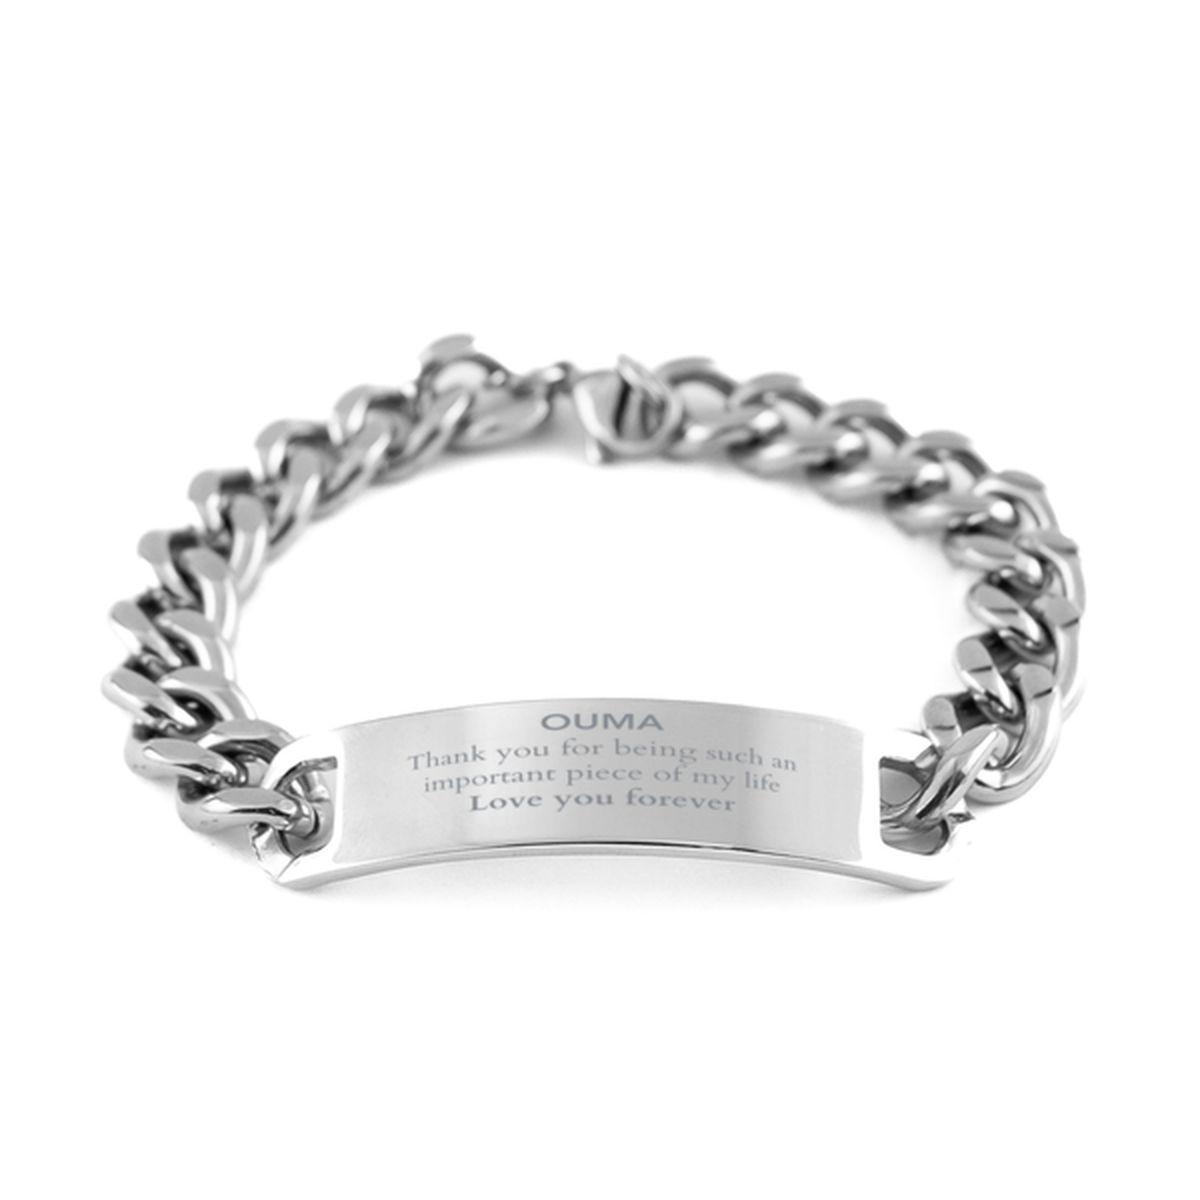 Appropriate Ouma Cuban Chain Stainless Steel Bracelet Epic Birthday Gifts for Ouma Thank you for being such an important piece of my life Ouma Christmas Mothers Fathers Day